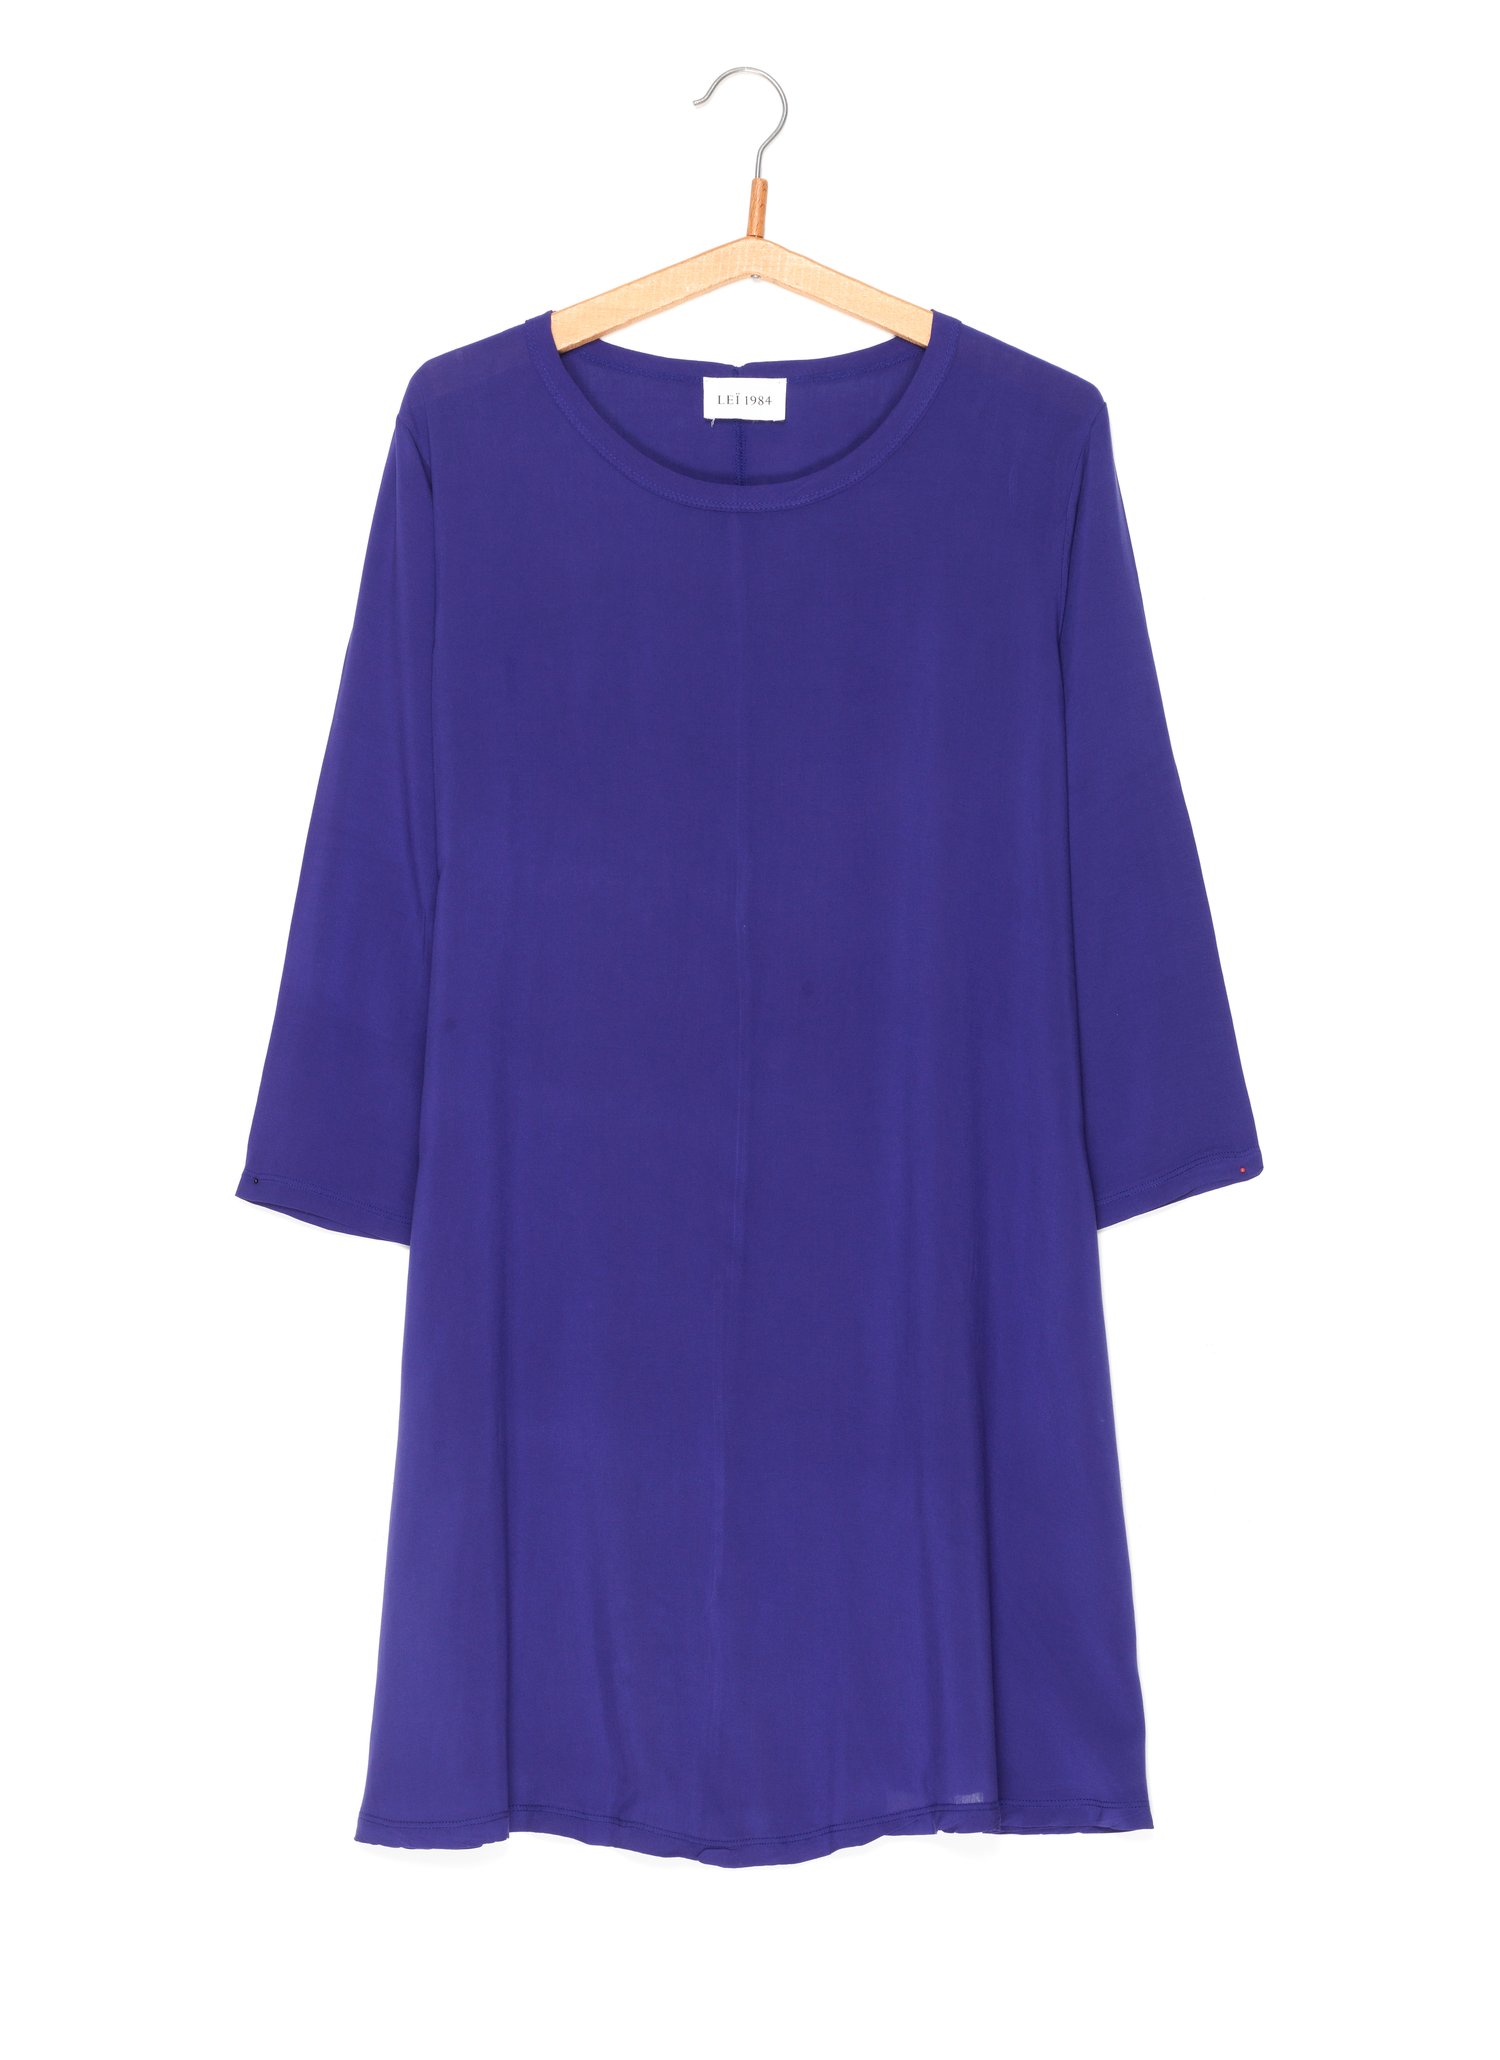 Image of Robe voile viscose JOELLE 129€ -50%